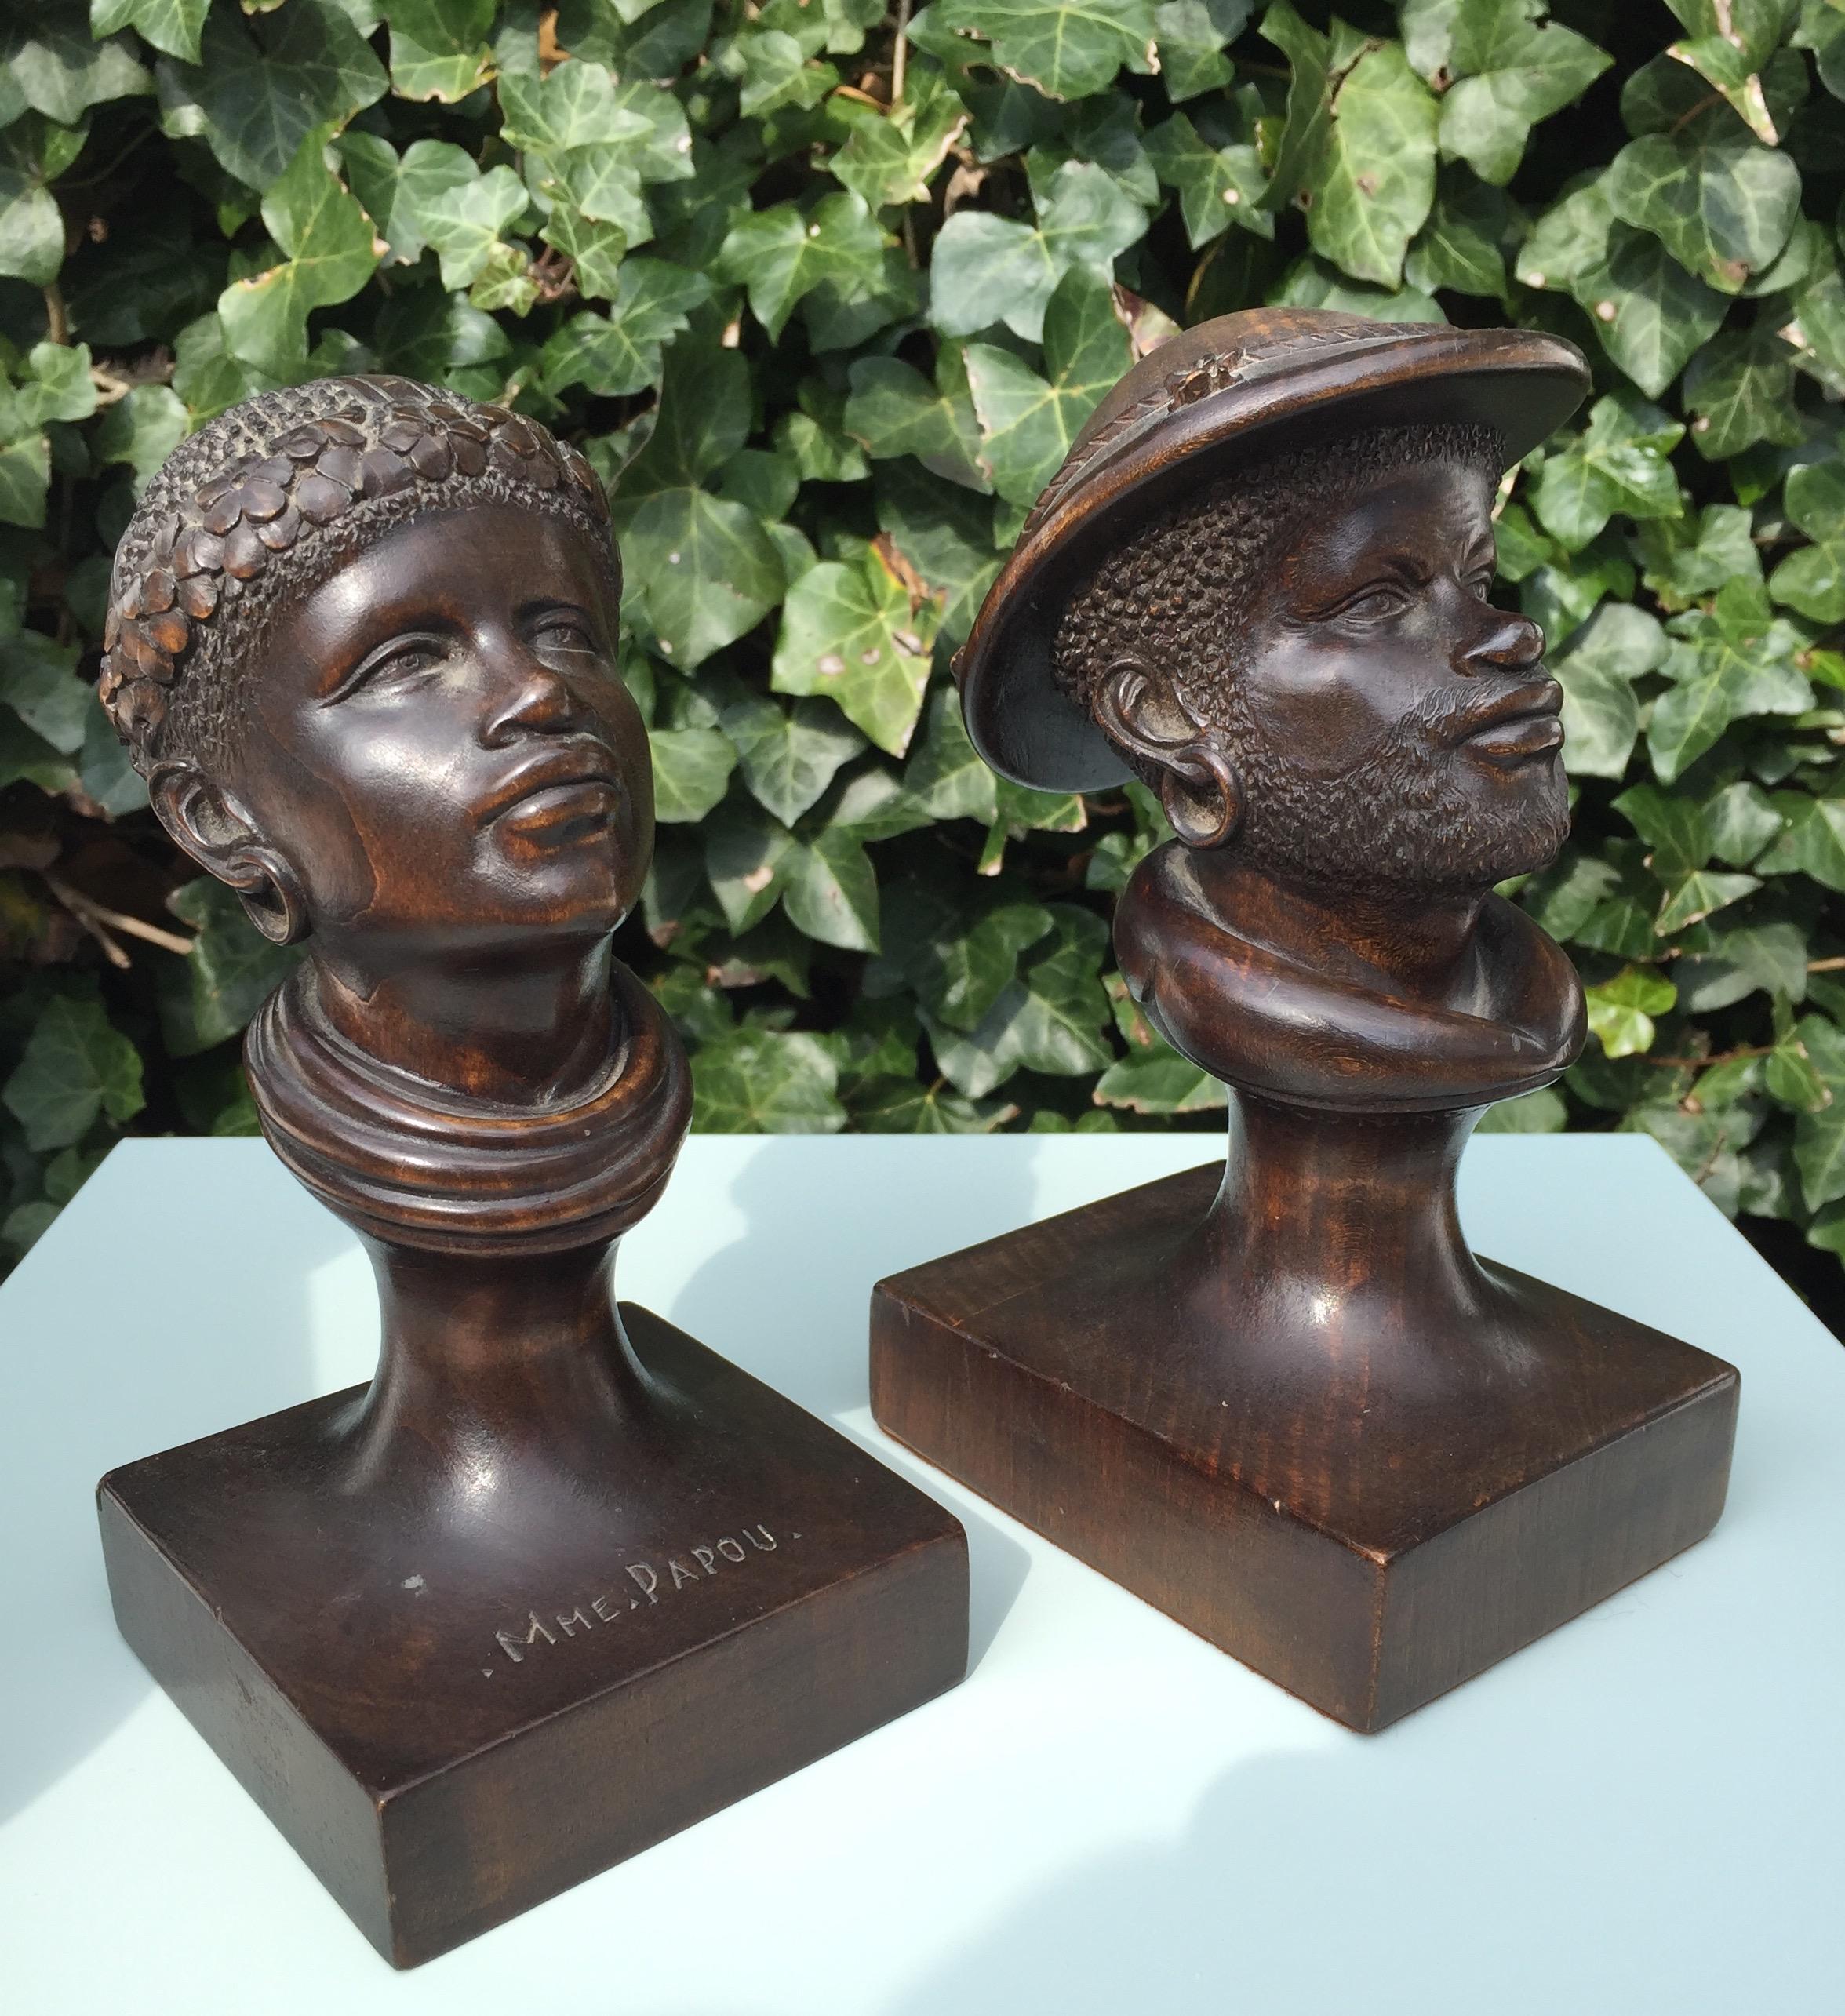 Museum quality and condition pair of busts.

Anyone who knows a little bit about indigenous art immediately can tell that these sculptures were not carved by a local artist. These are clearly in the realistic style of a European craftsman. Belgian